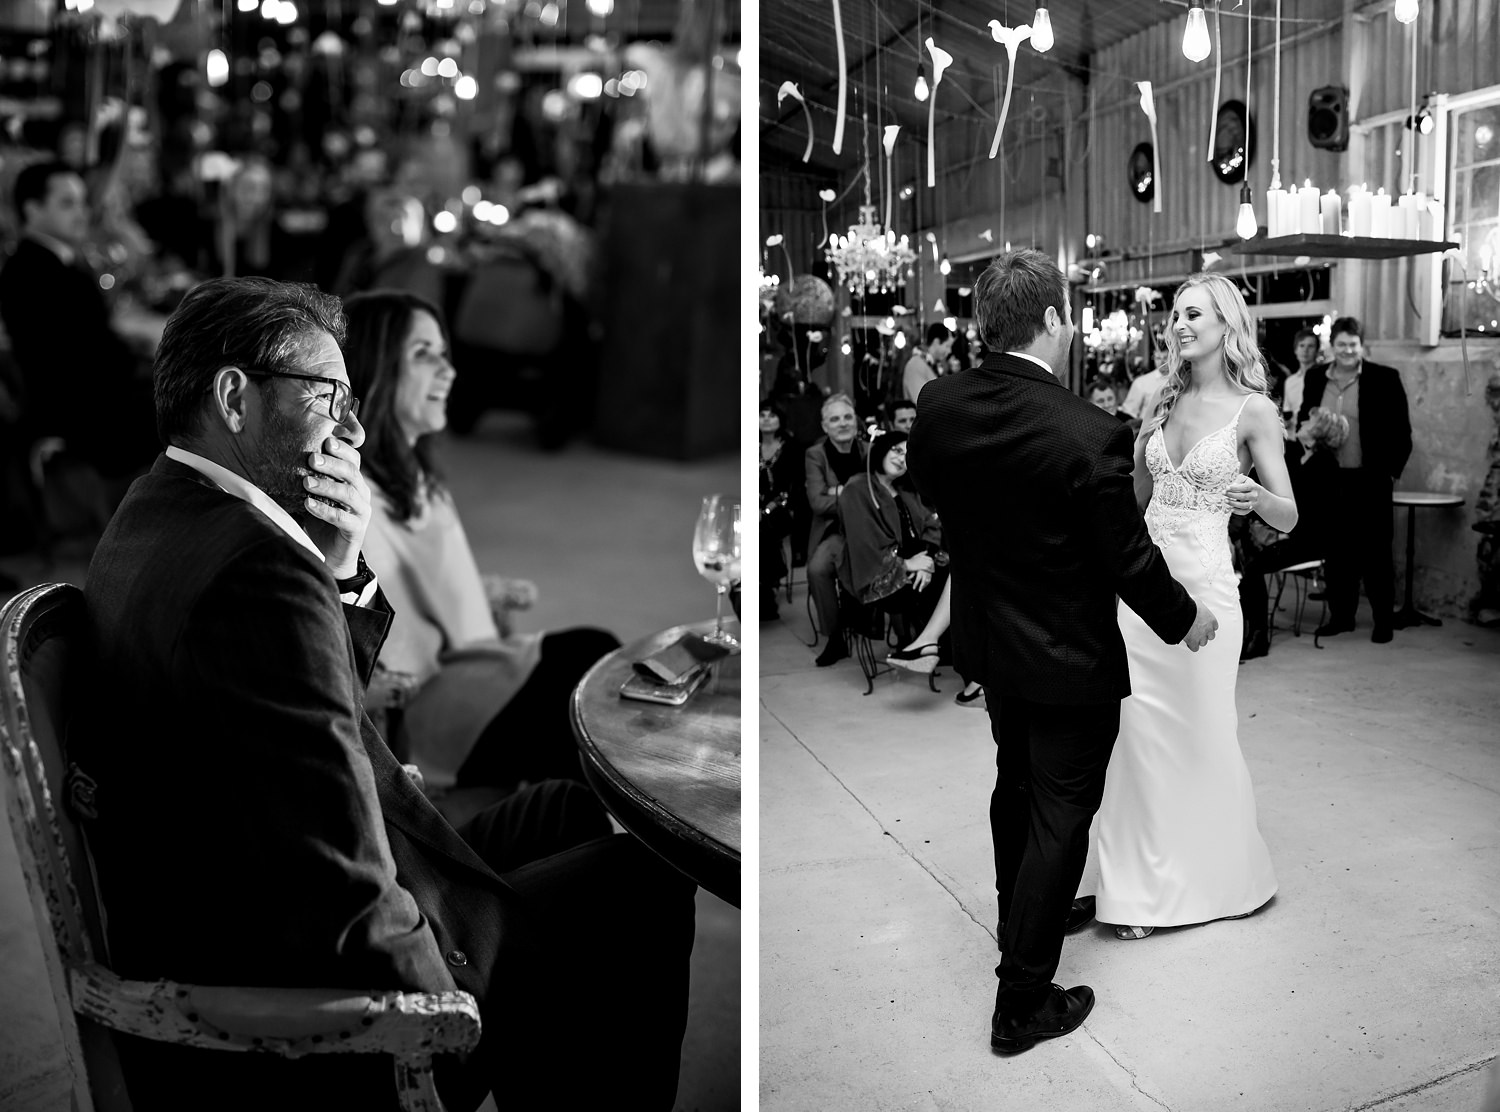 Guests look on smiling as the bride and groom open the dancefloor with their first dance in these black and white wedding photographs from The Rose Barn